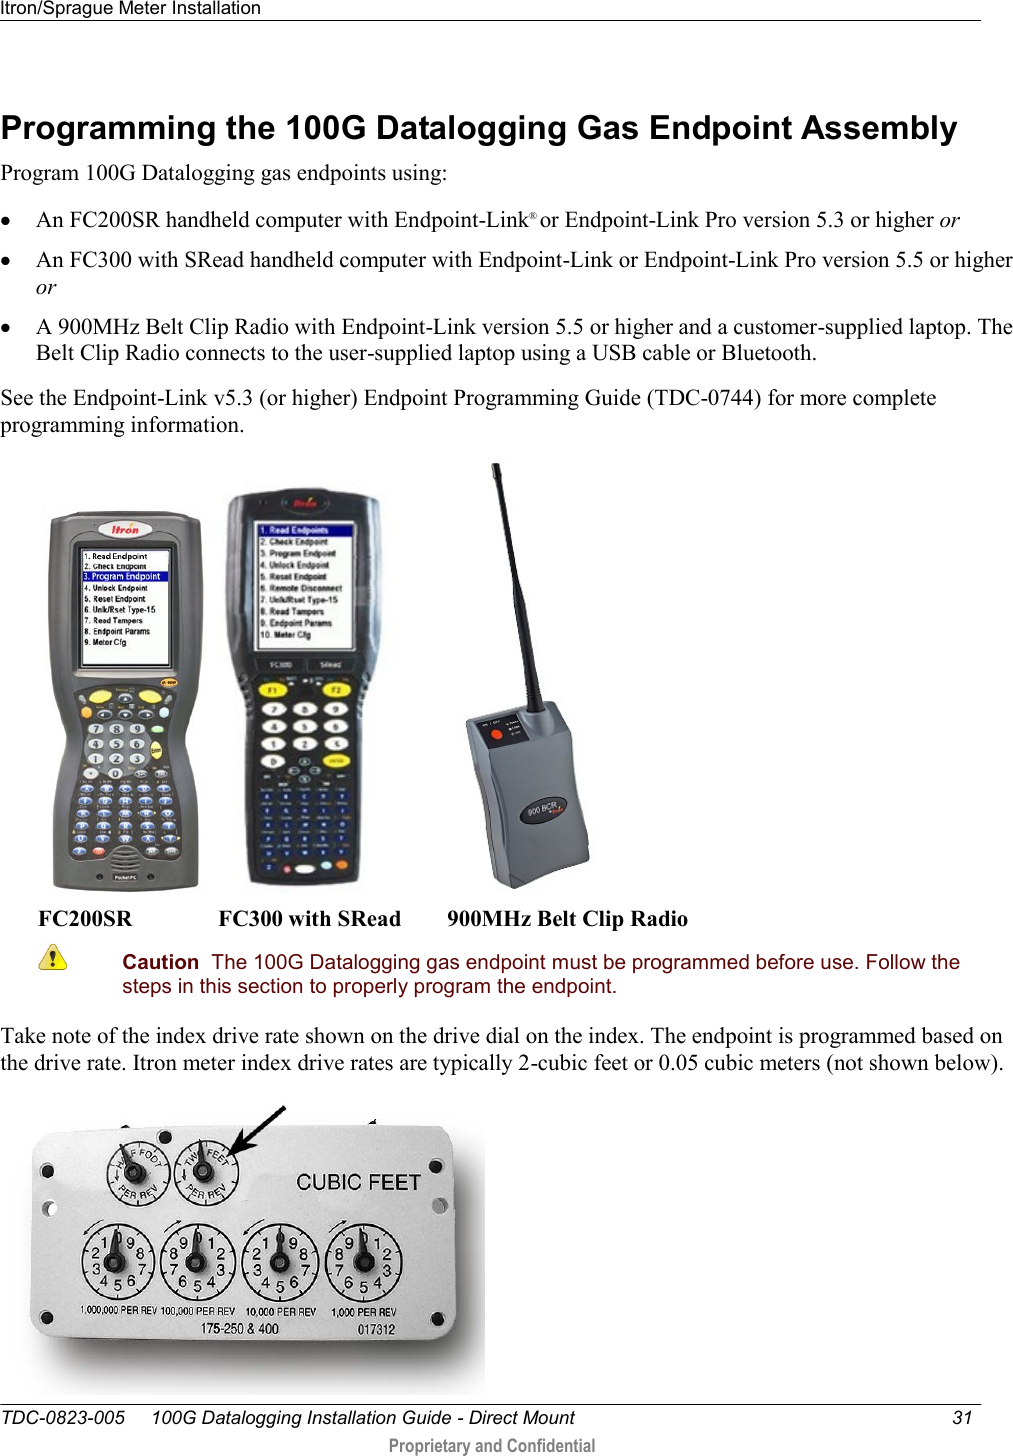 Itron/Sprague Meter Installation   TDC-0823-005     100G Datalogging Installation Guide - Direct Mount  31   Proprietary and Confidential     Programming the 100G Datalogging Gas Endpoint Assembly Program 100G Datalogging gas endpoints using:  An FC200SR handheld computer with Endpoint-Link® or Endpoint-Link Pro version 5.3 or higher or  An FC300 with SRead handheld computer with Endpoint-Link or Endpoint-Link Pro version 5.5 or higher or  A 900MHz Belt Clip Radio with Endpoint-Link version 5.5 or higher and a customer-supplied laptop. The Belt Clip Radio connects to the user-supplied laptop using a USB cable or Bluetooth. See the Endpoint-Link v5.3 (or higher) Endpoint Programming Guide (TDC-0744) for more complete programming information.      FC200SR               FC300 with SRead        900MHz Belt Clip Radio  Caution  The 100G Datalogging gas endpoint must be programmed before use. Follow the steps in this section to properly program the endpoint.  Take note of the index drive rate shown on the drive dial on the index. The endpoint is programmed based on the drive rate. Itron meter index drive rates are typically 2-cubic feet or 0.05 cubic meters (not shown below).    